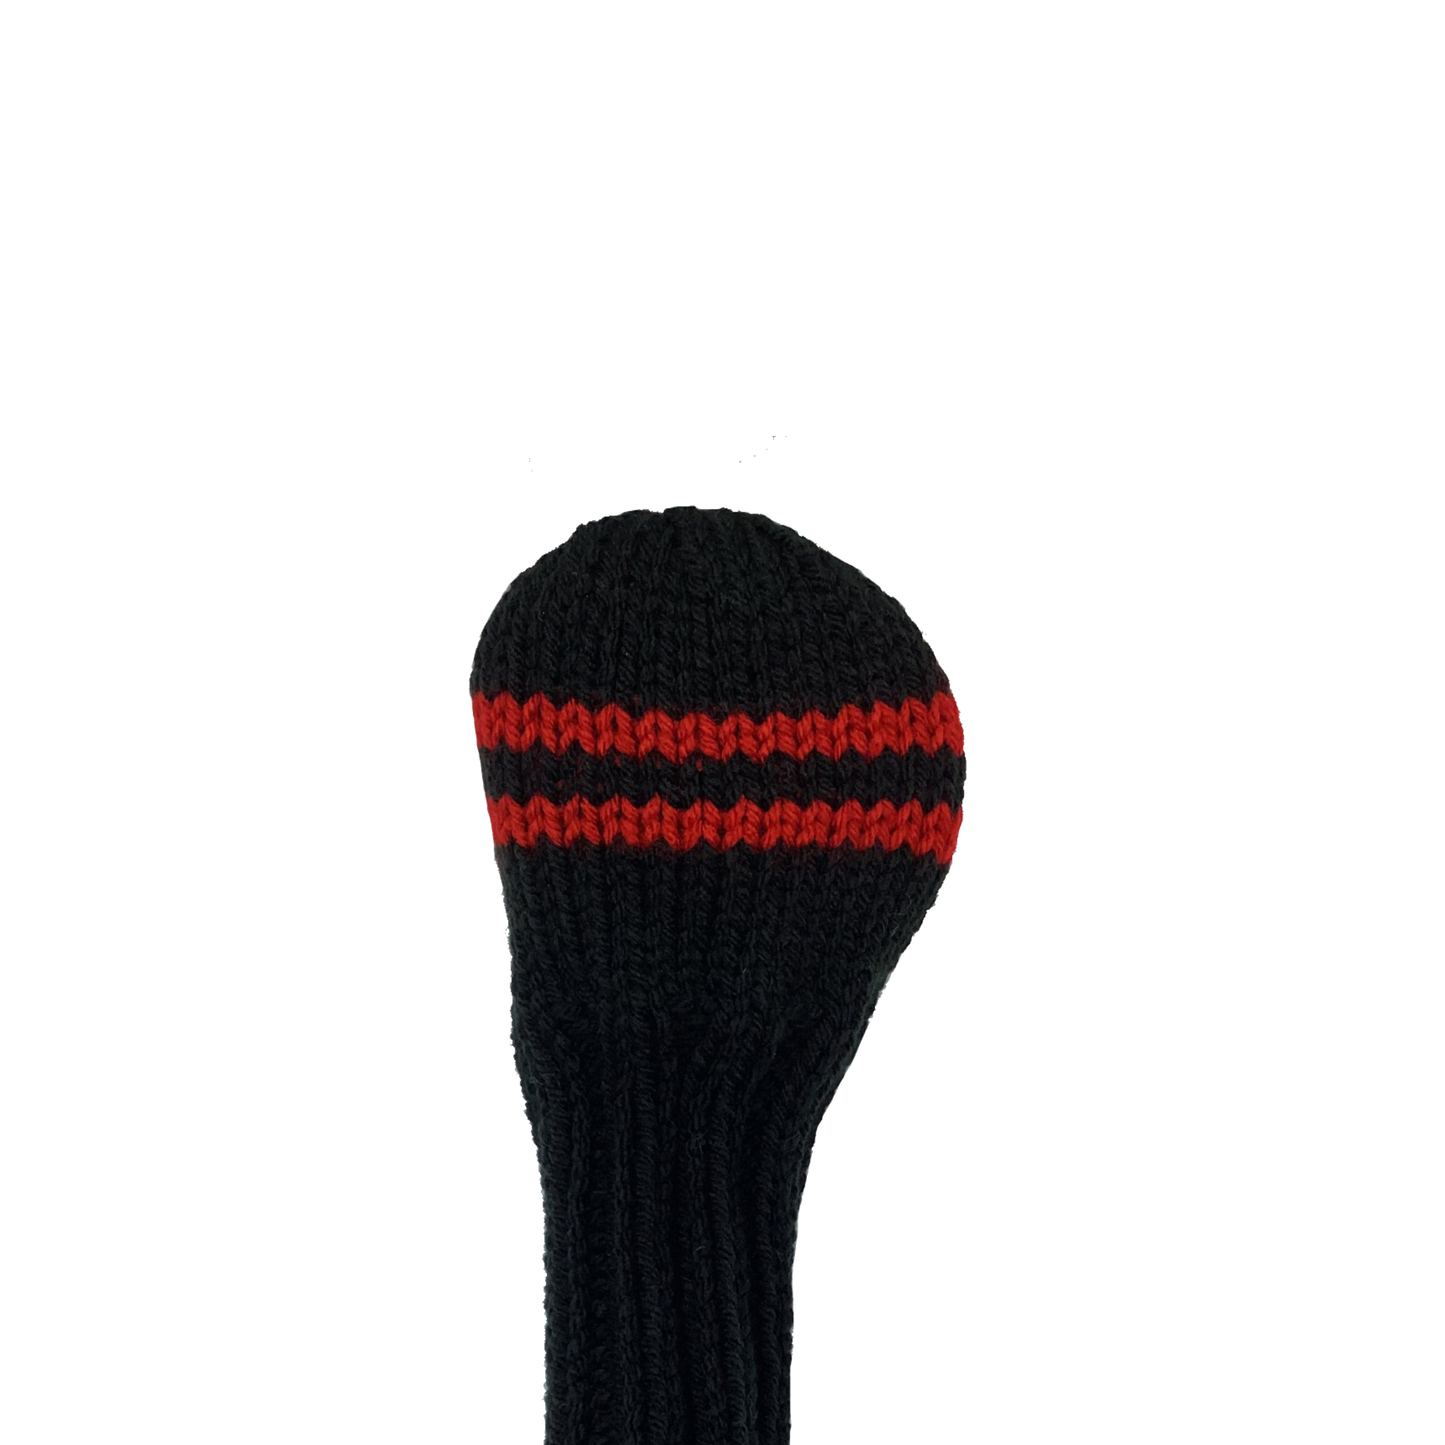 Black and Red - Fairway Wood #2 Headcover